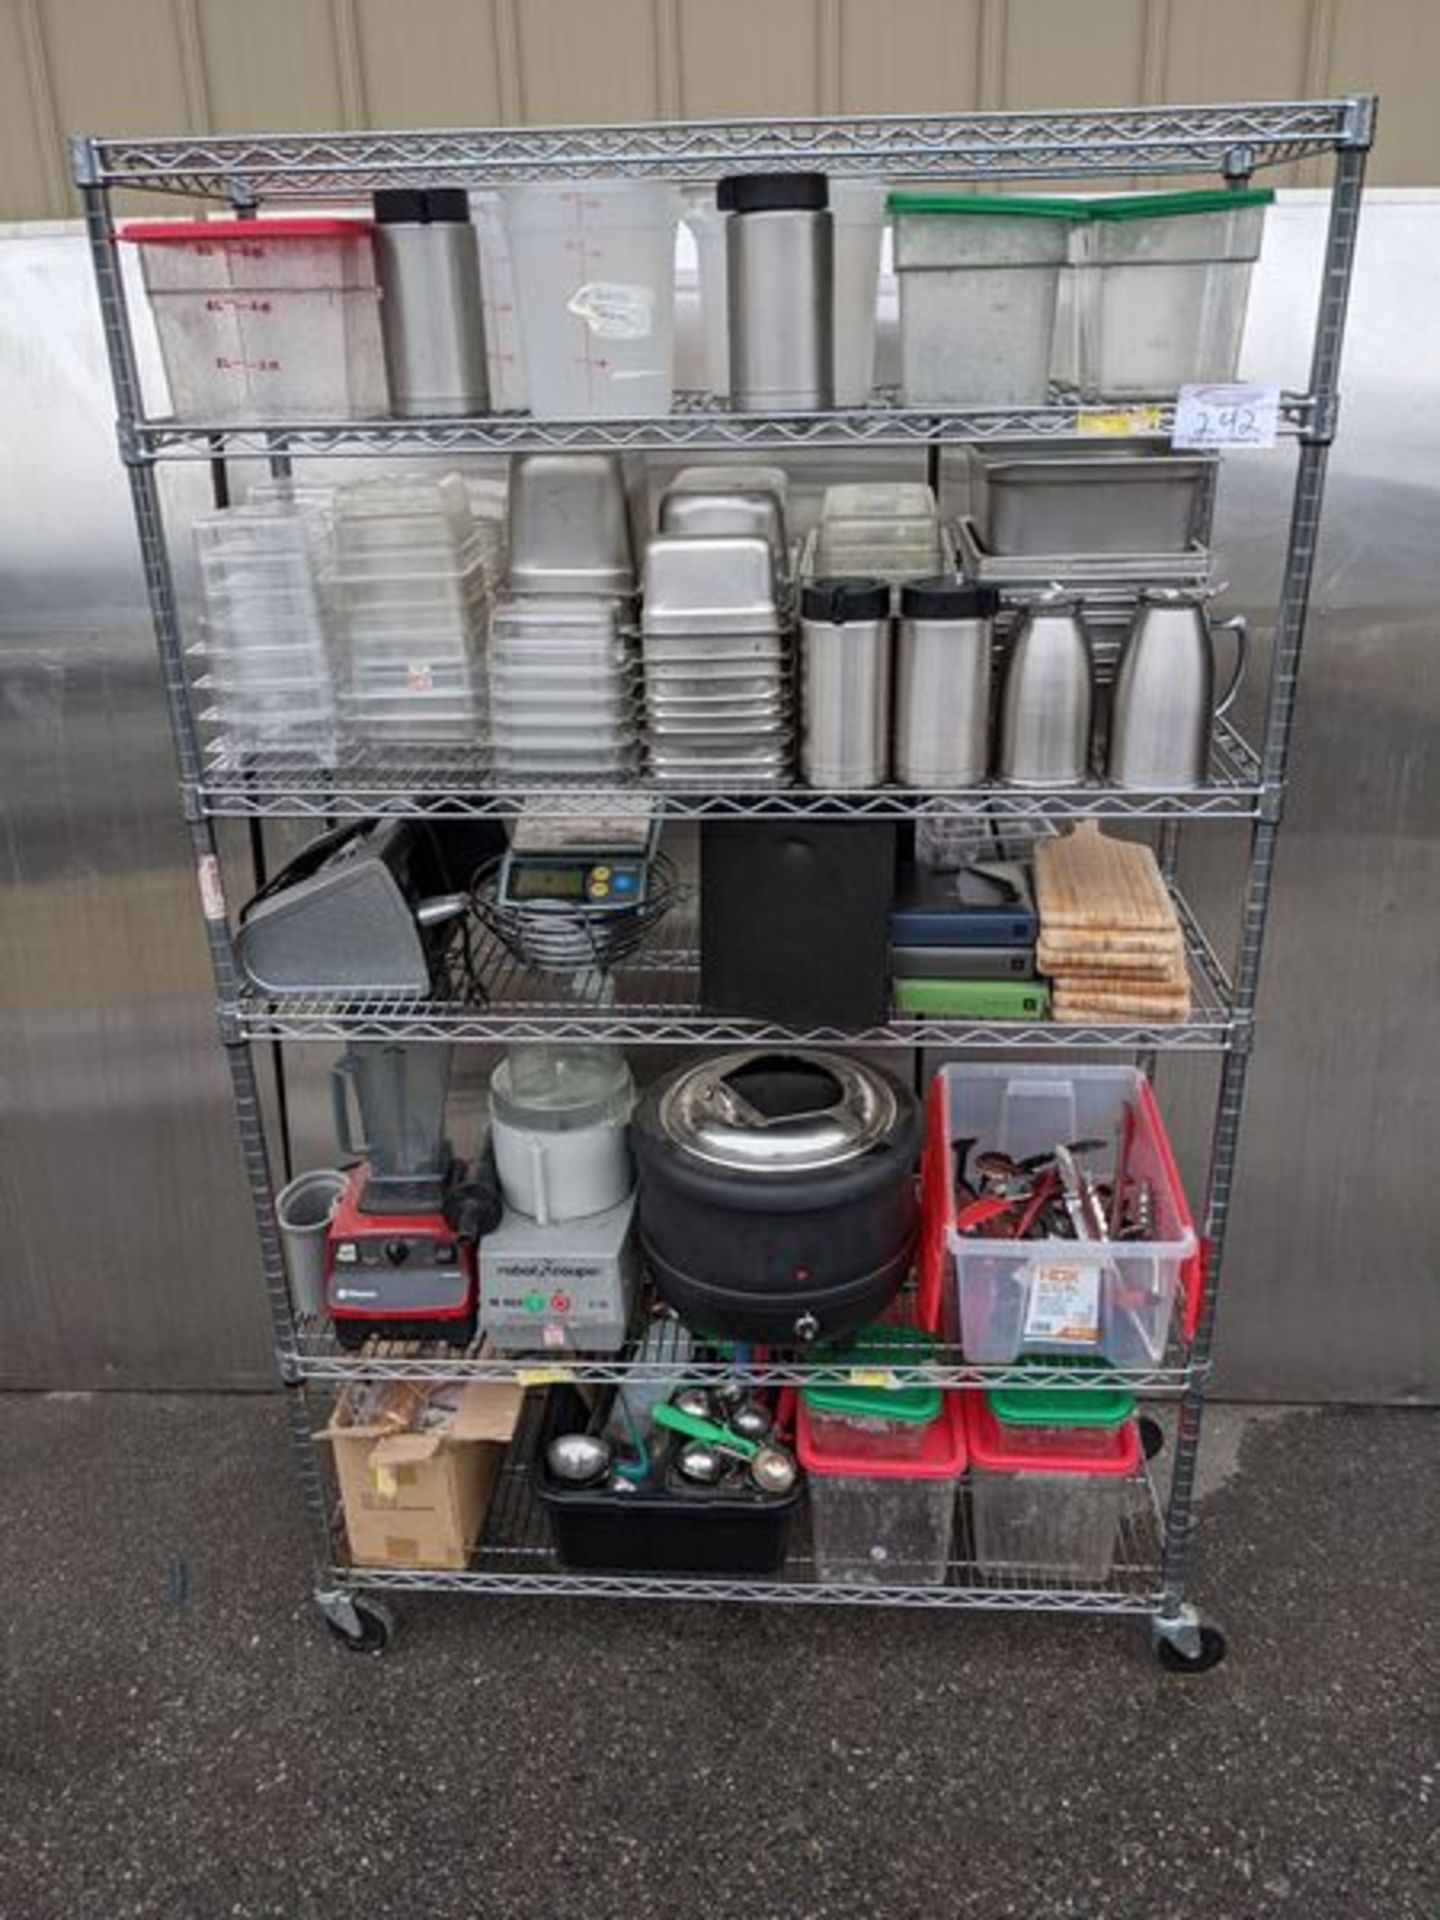 48" Stainless Steel Rack on Casters with Contents (blender, soup pot, inserts etc..)